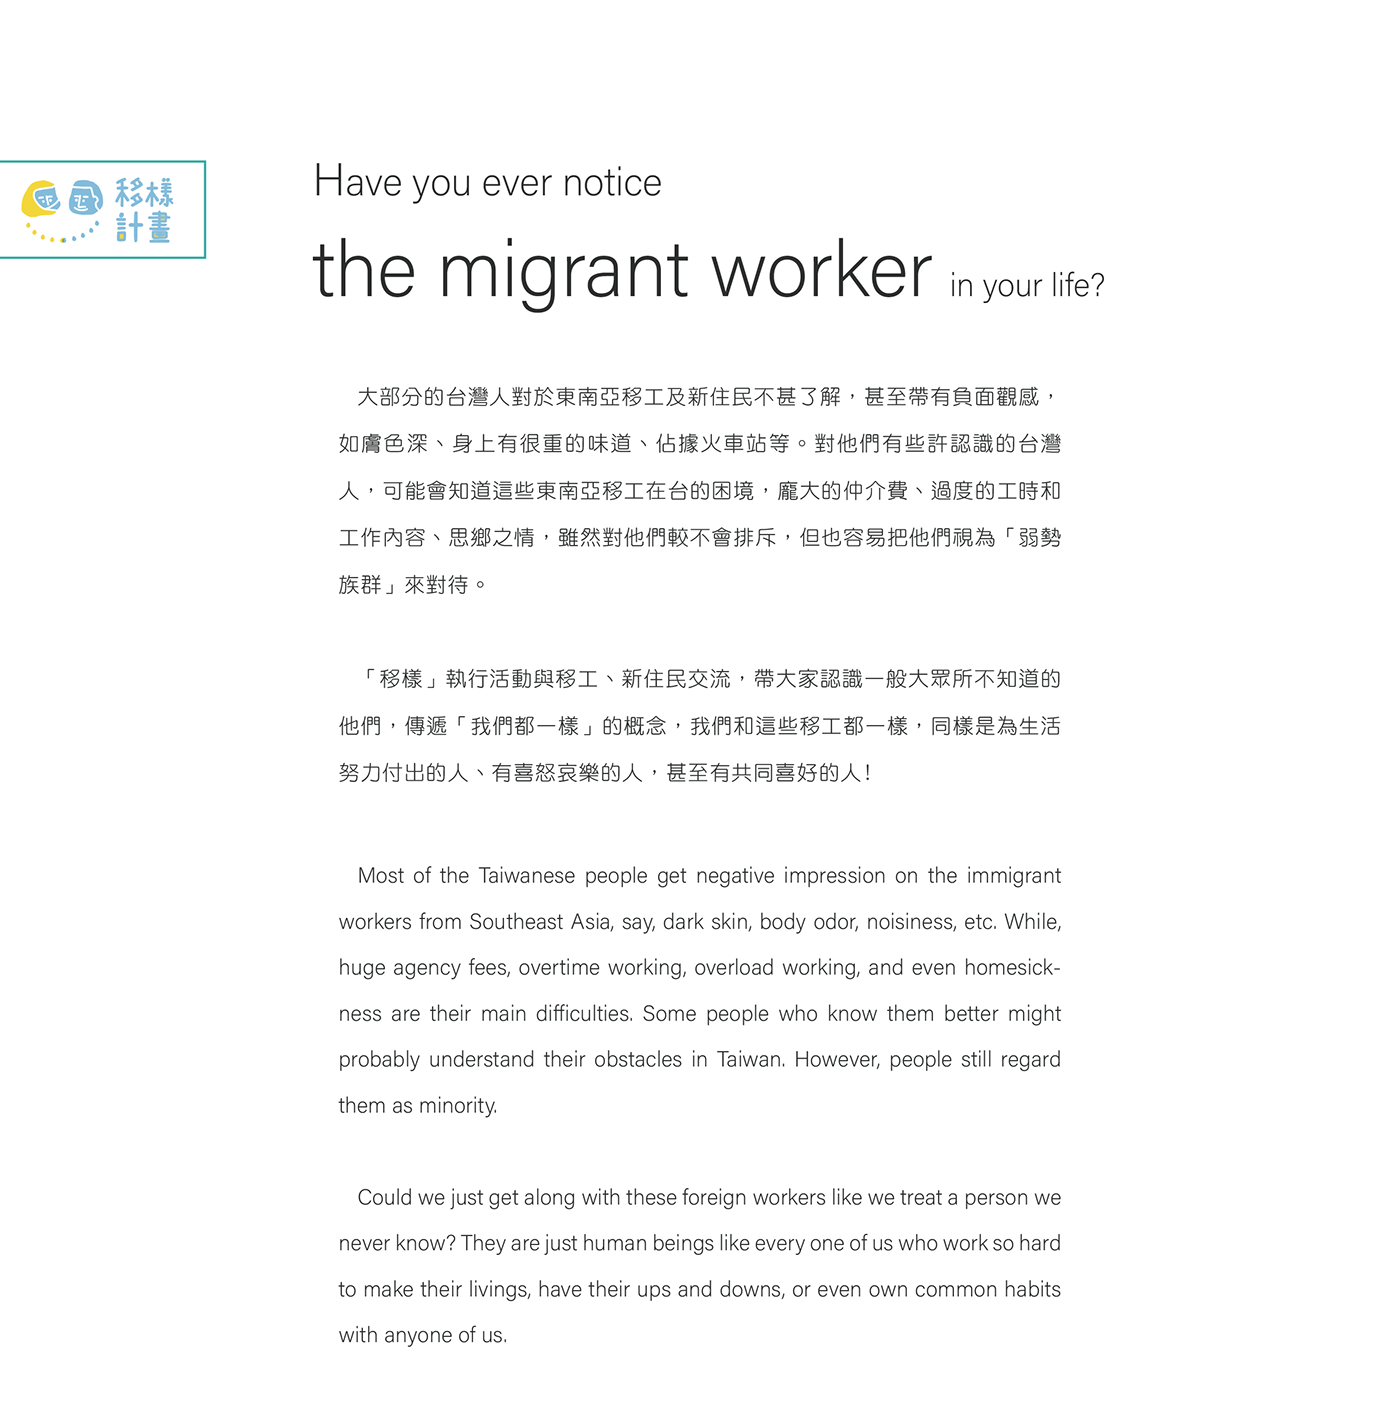 Migrant Worker worker society indonesia vietnam Thailand philippines southeast asia